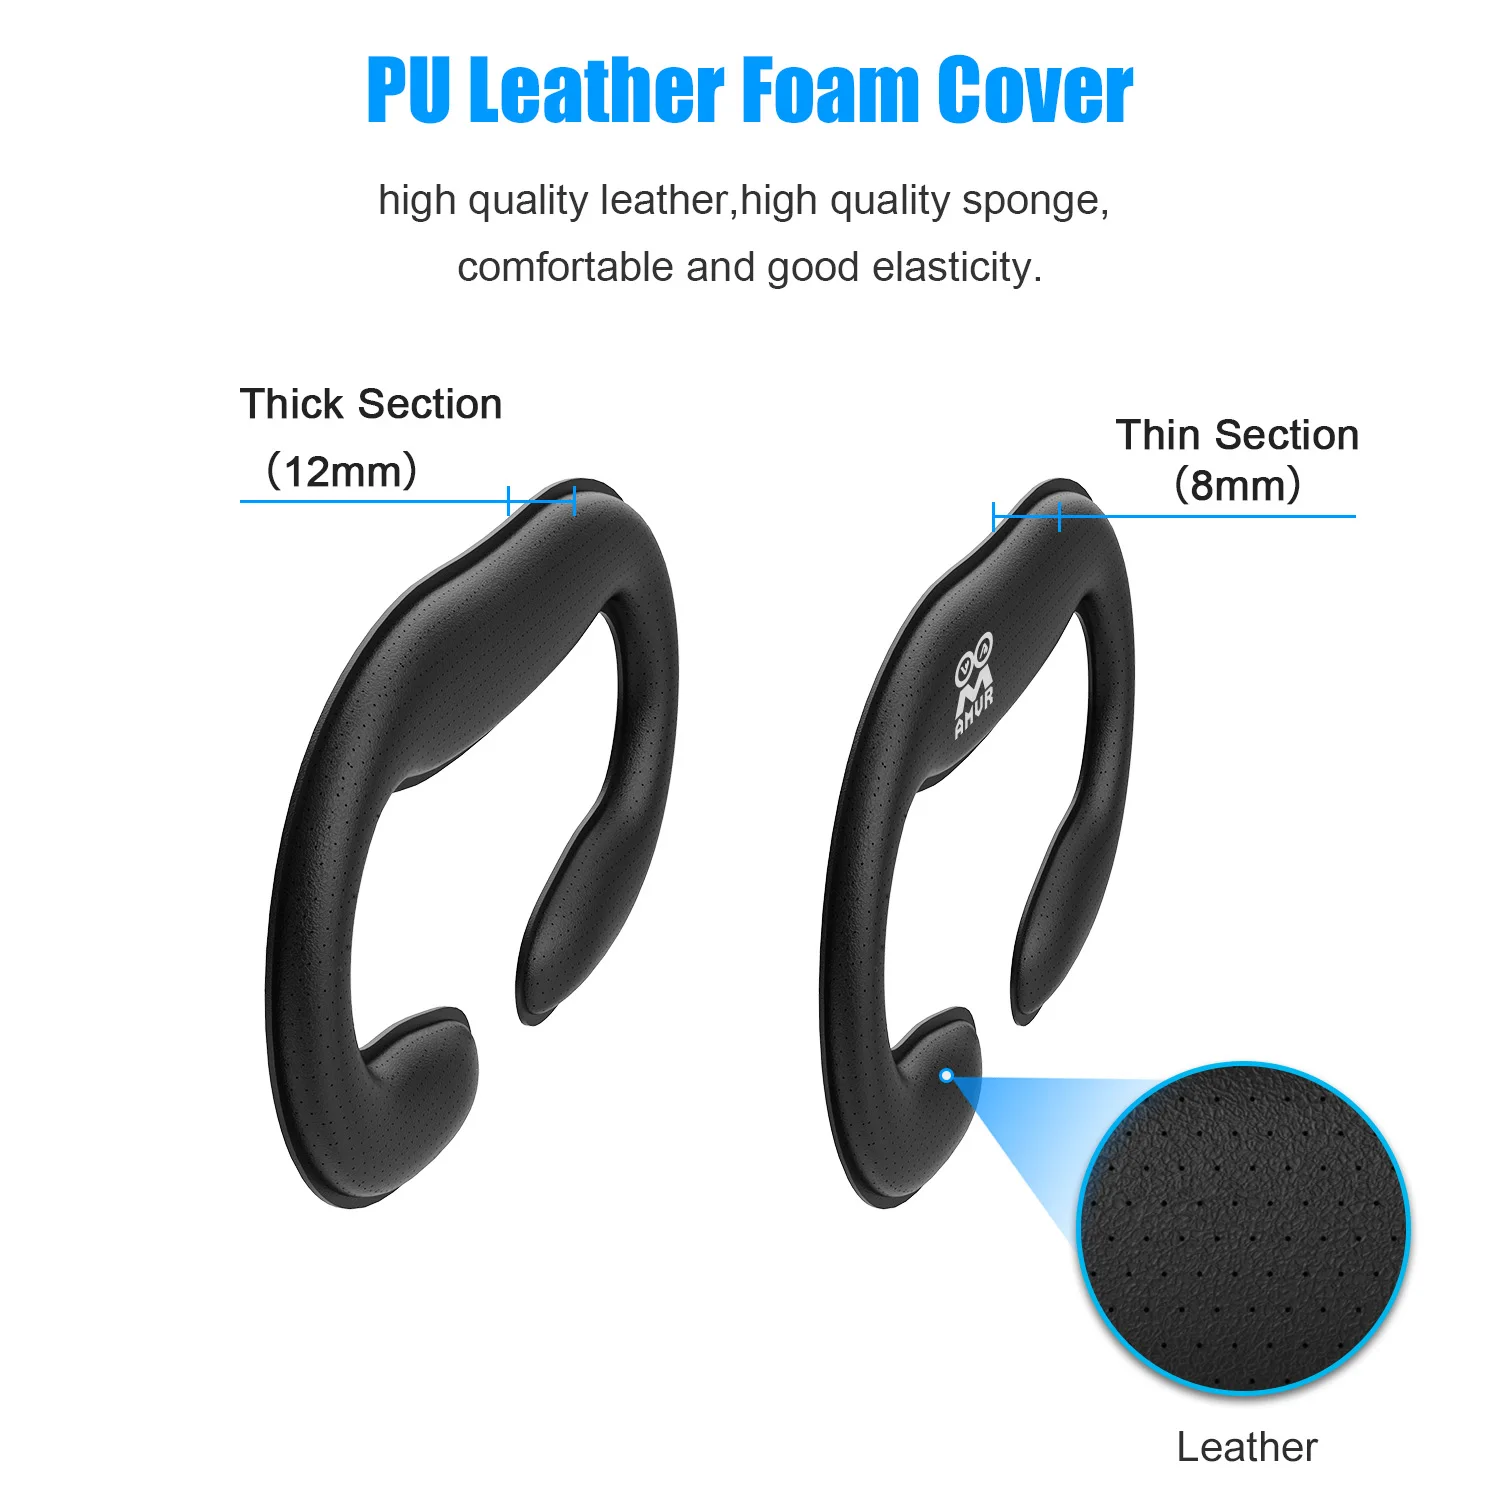 VR Cover Facial Oculus Quest 2 Face Cushion Cover Replacement Pad Custom Soft Interface Bracket & Anti-Leakage Light PU Leather